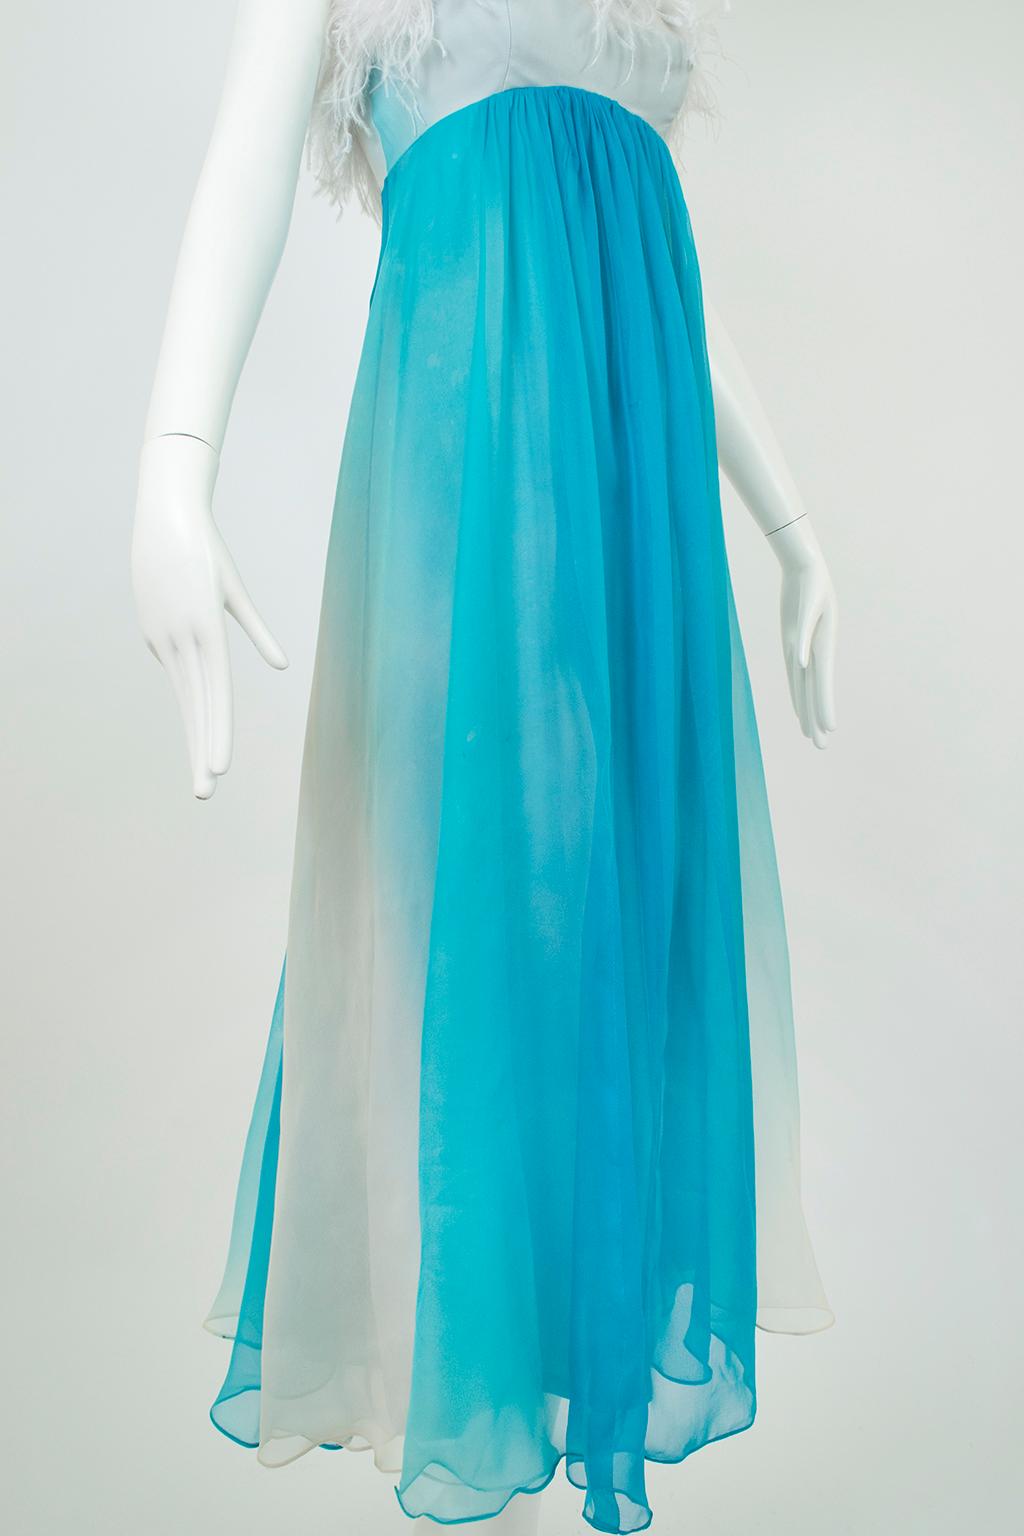 Aqua Ombré Tie Dye Chiffon Ball Gown with Ostrich Feather Trim – XS, 1960s For Sale 3